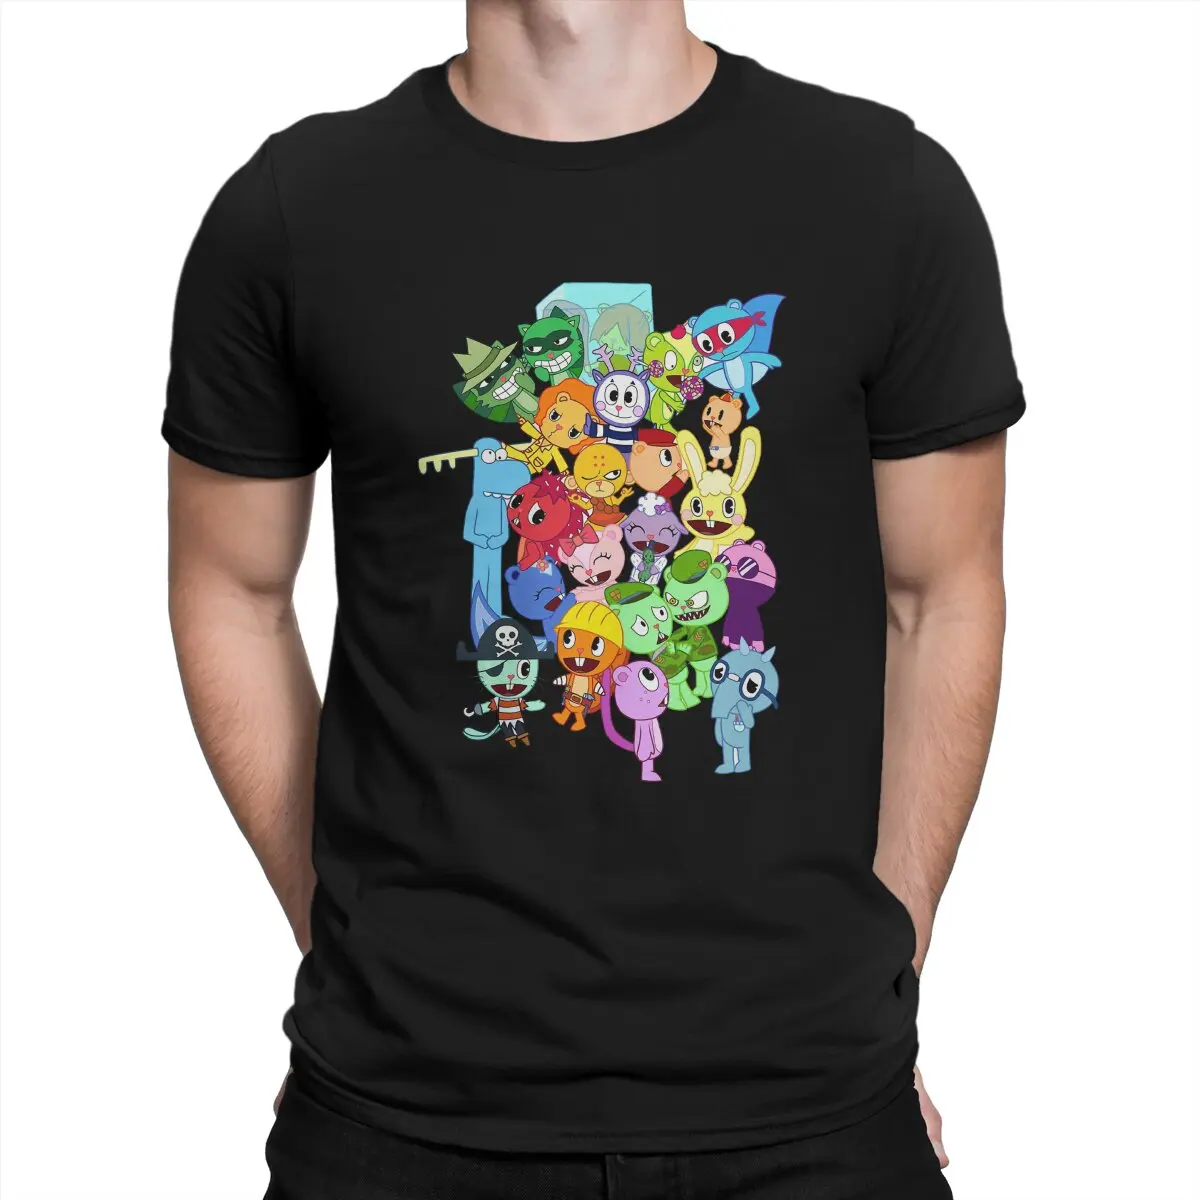 Novelty All Characters T-Shirt for Men O Neck 100% Cotton T Shirts Happy Tree Friends Cuddles Giggles Anime Short Sleeve Tees